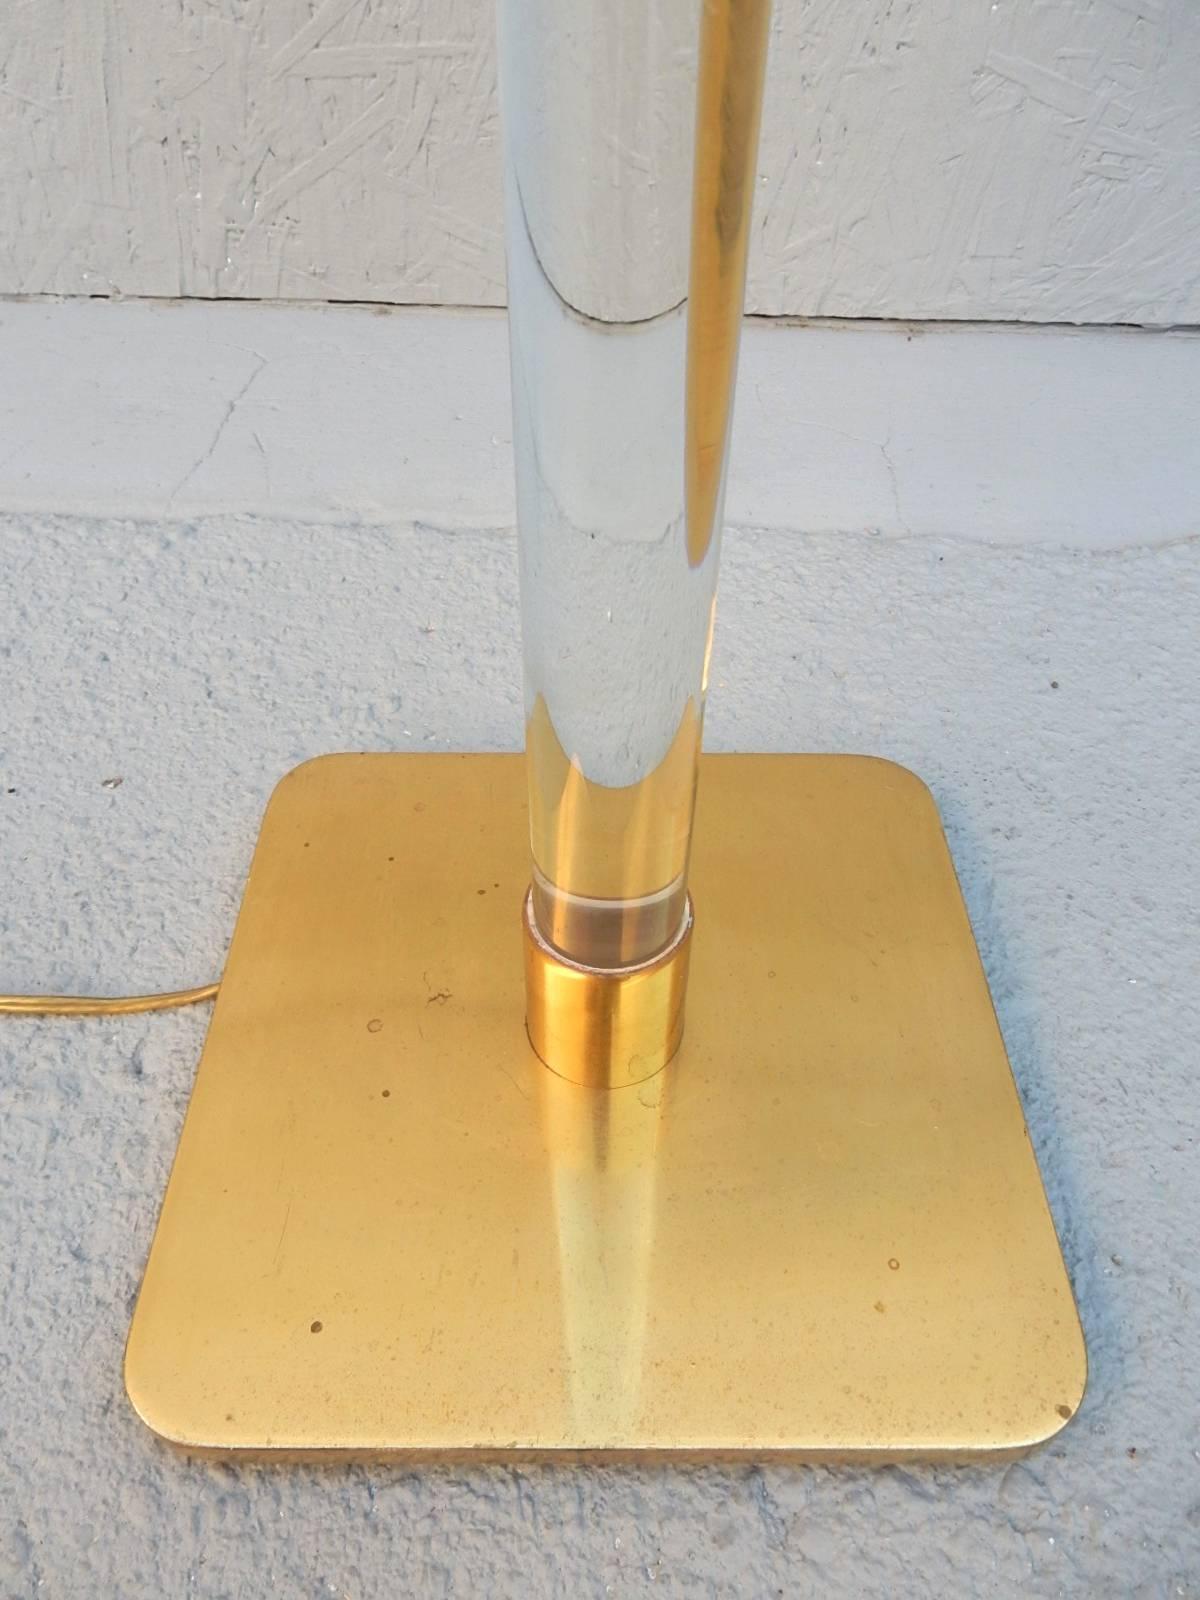 Solid Lucite pole floor lamp by Hansen of New York, circa 1970.
Golden brass hardware and base. Stamped 